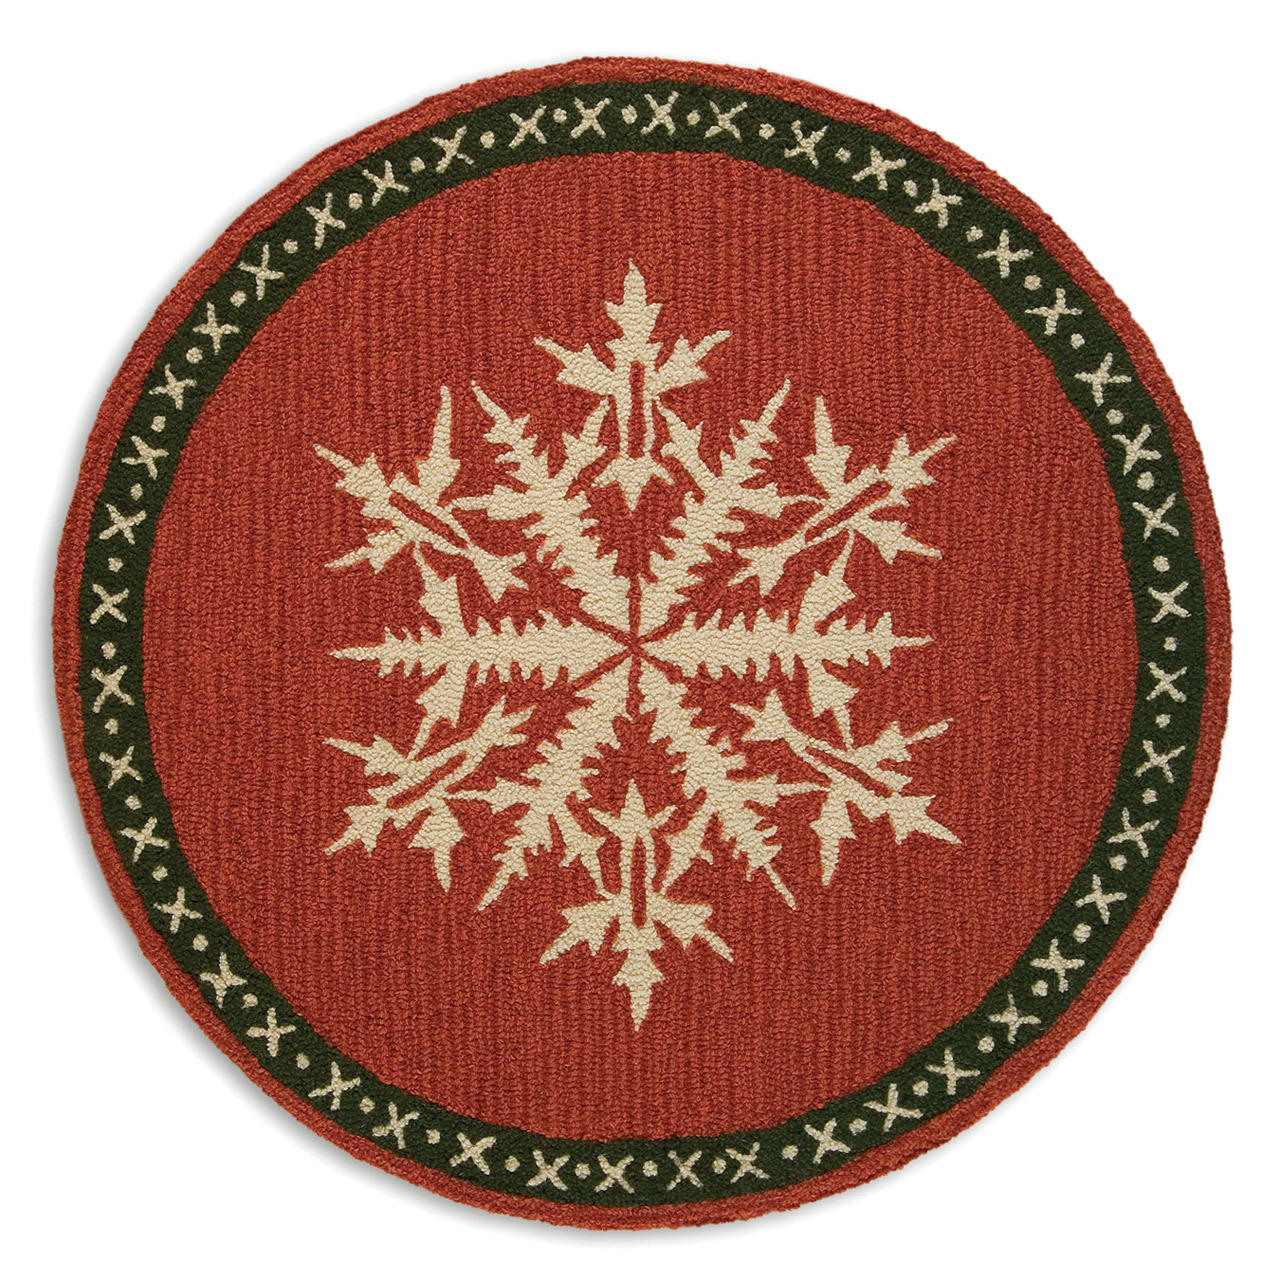 20 x 30 Chandler 4 Corners Artist-Designed Dashing Through The Snow Hand-Hooked Wool Accent Rug